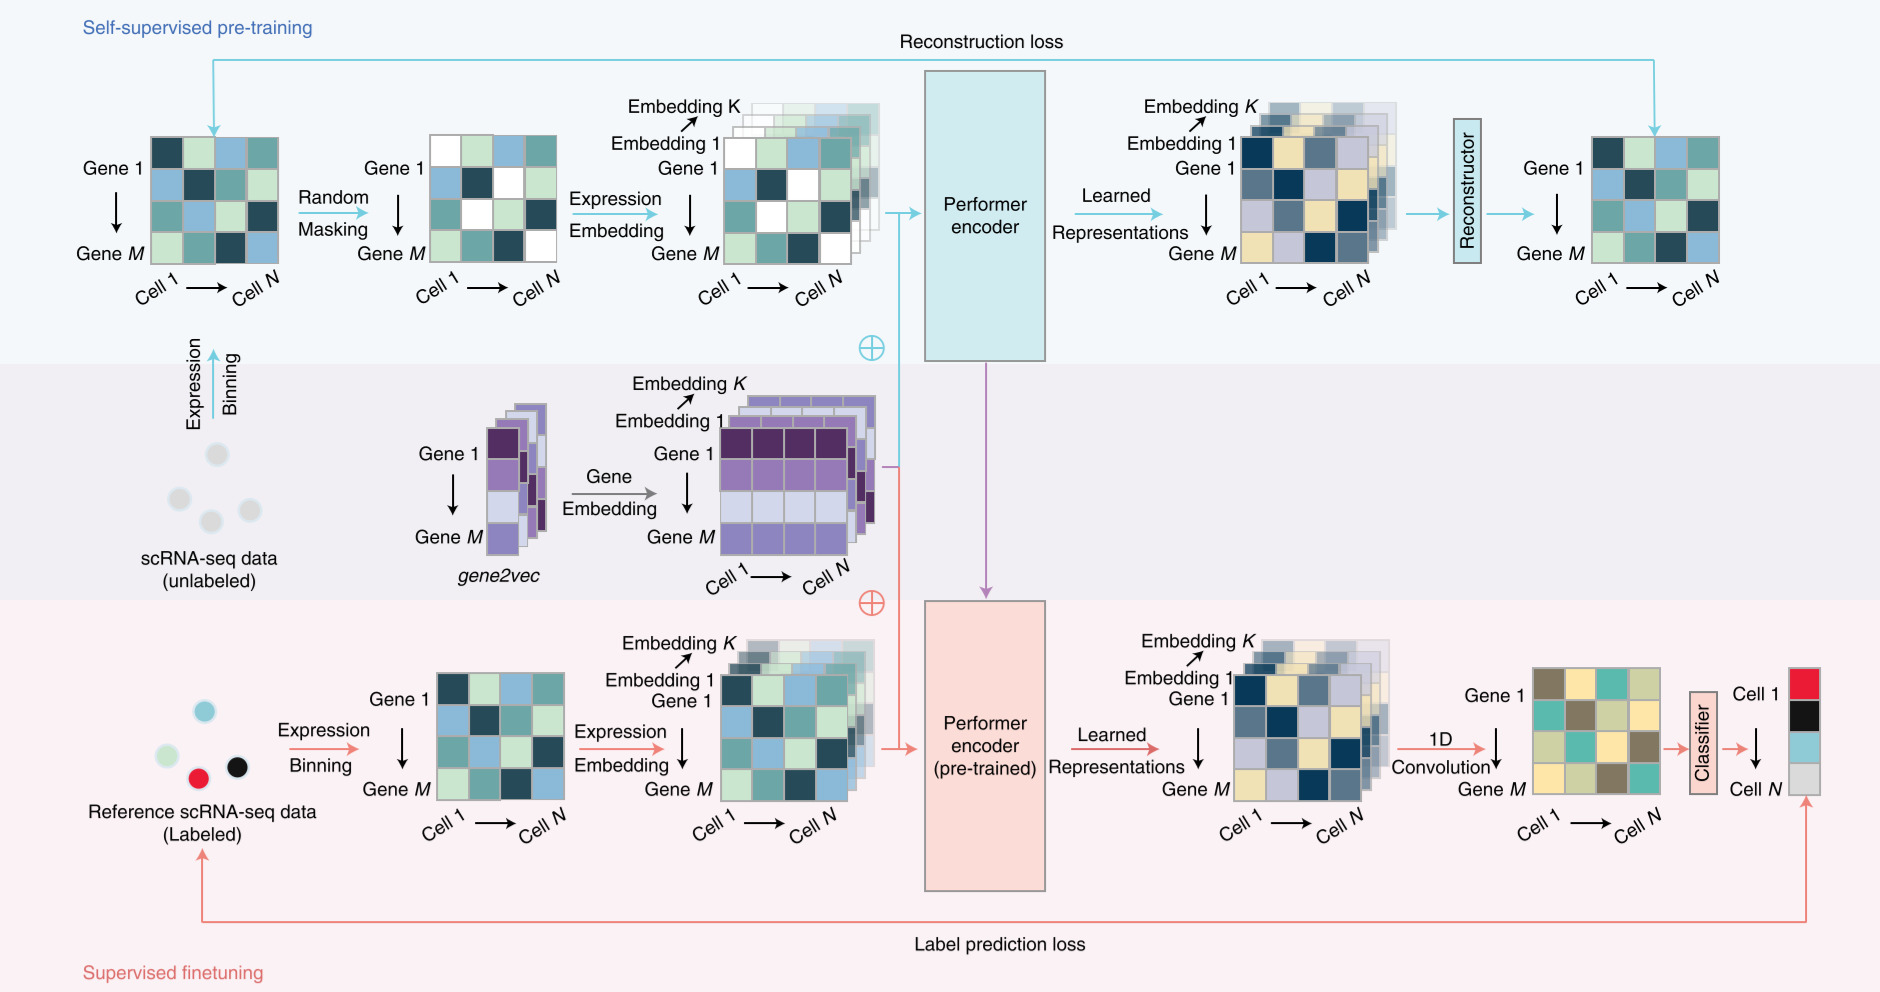 Self-supervised pre-training and unlabeled scRNA-seq data embedding